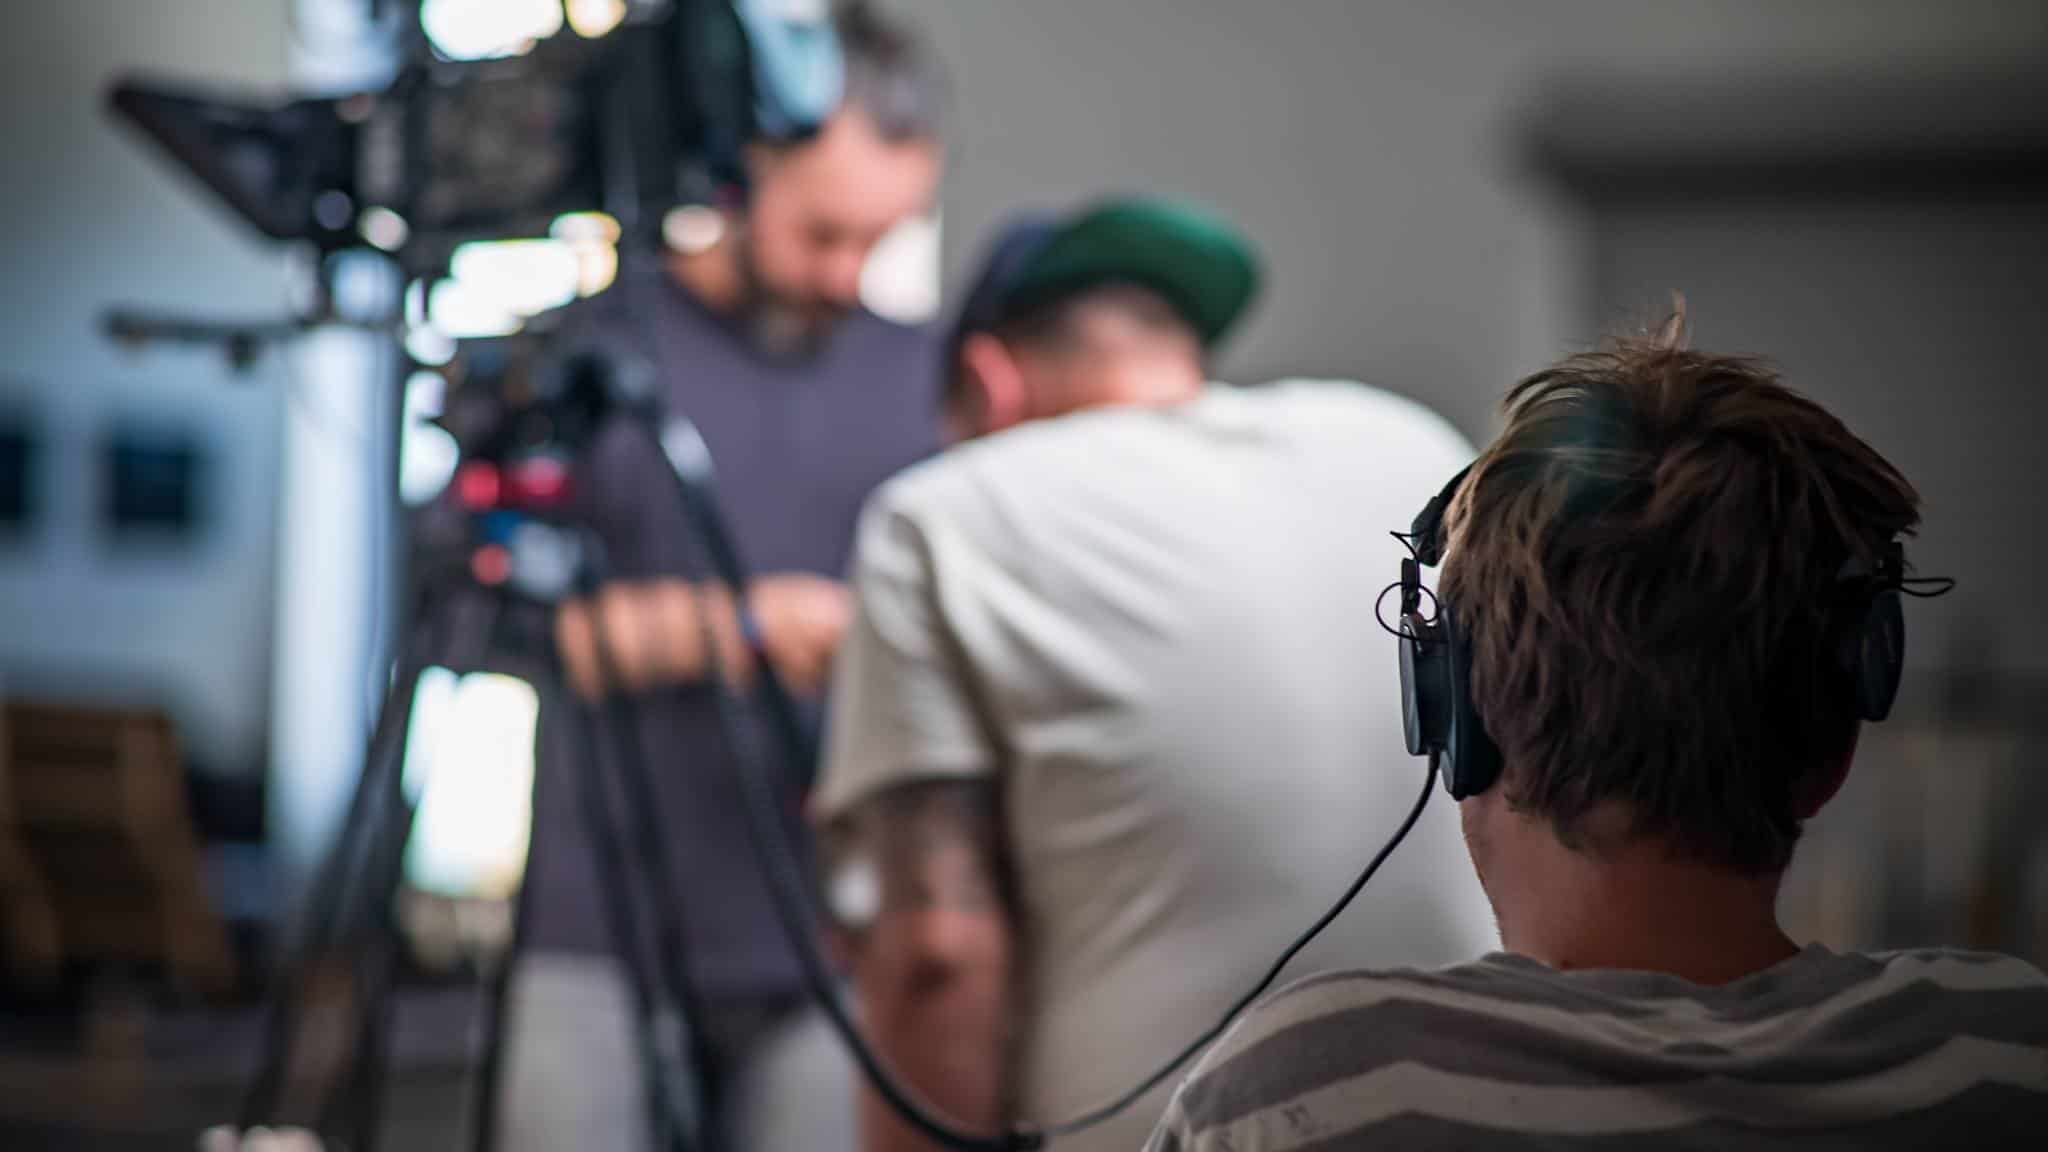 5 Questions to Consider Before Hiring a Video Production Company